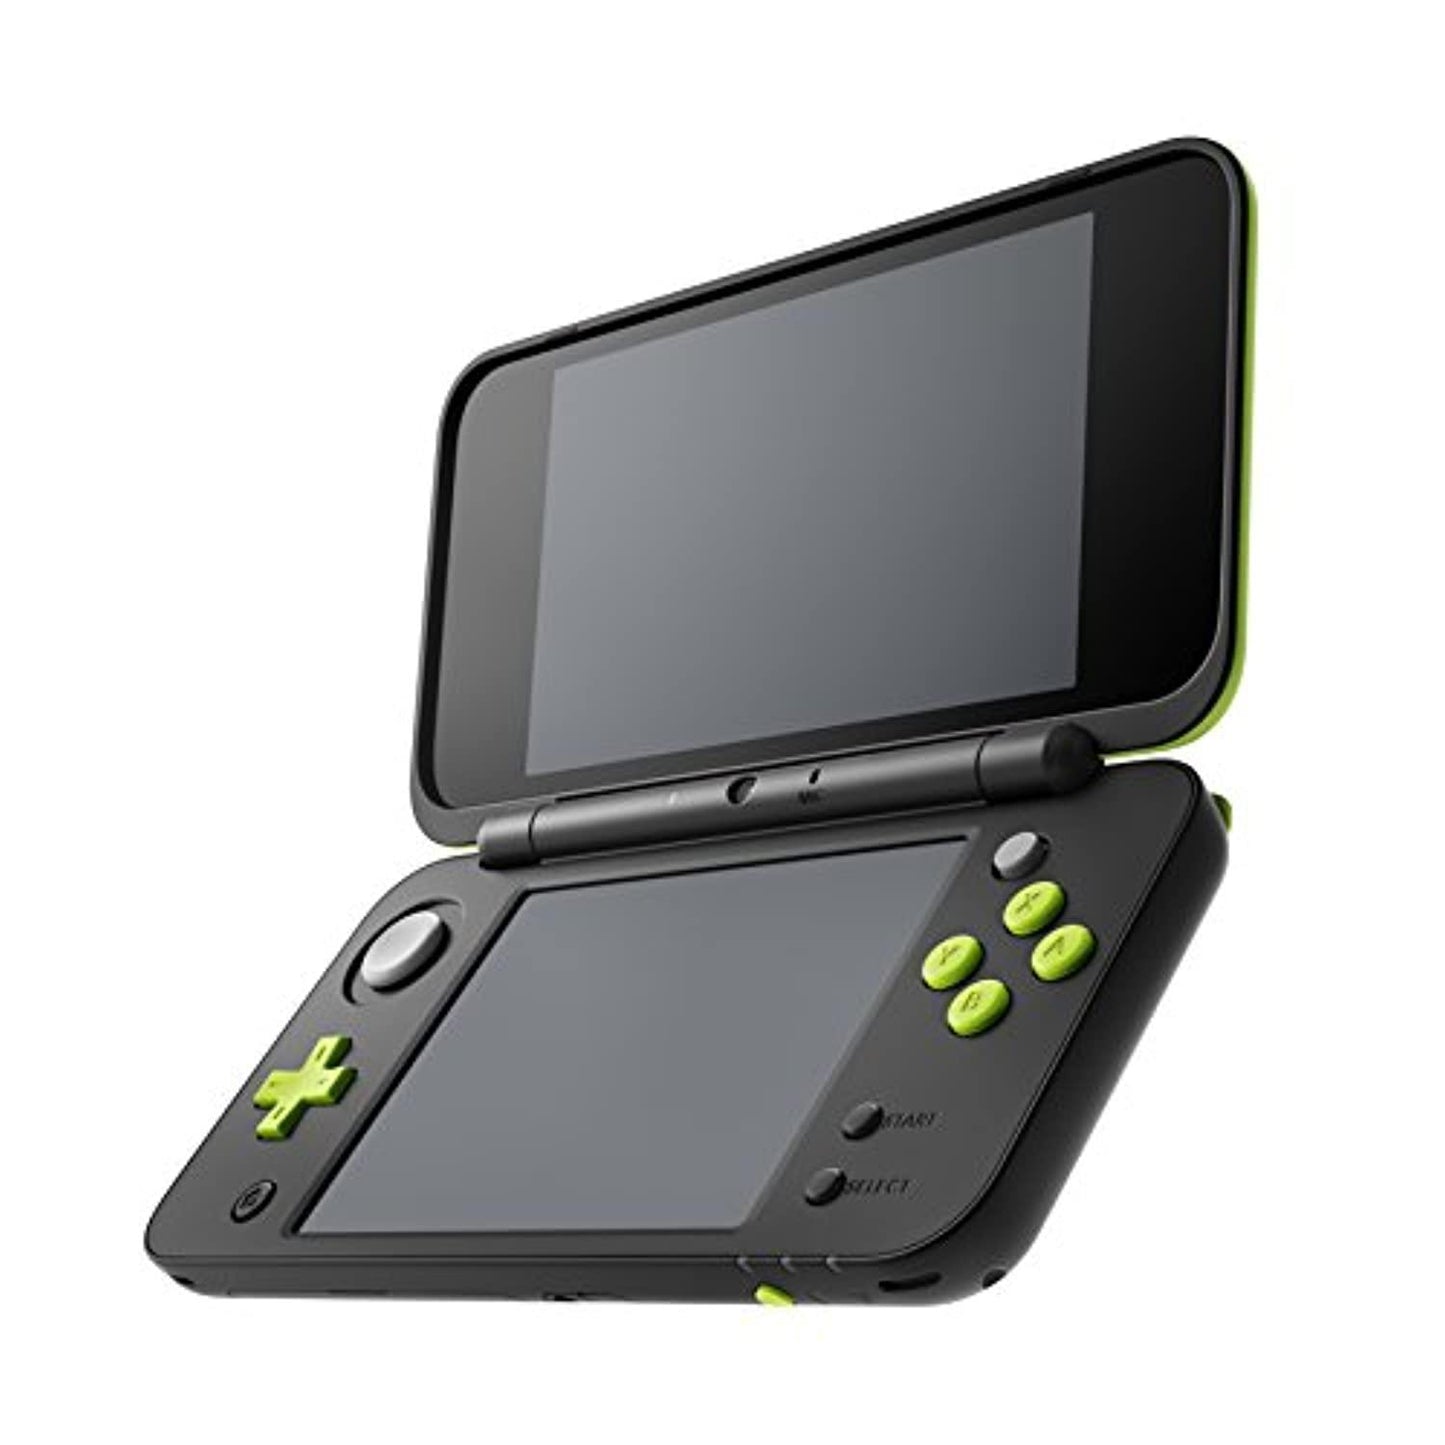 New Nintendo 2DS XL Console - Black/Lime Green (USED) - Offer Games